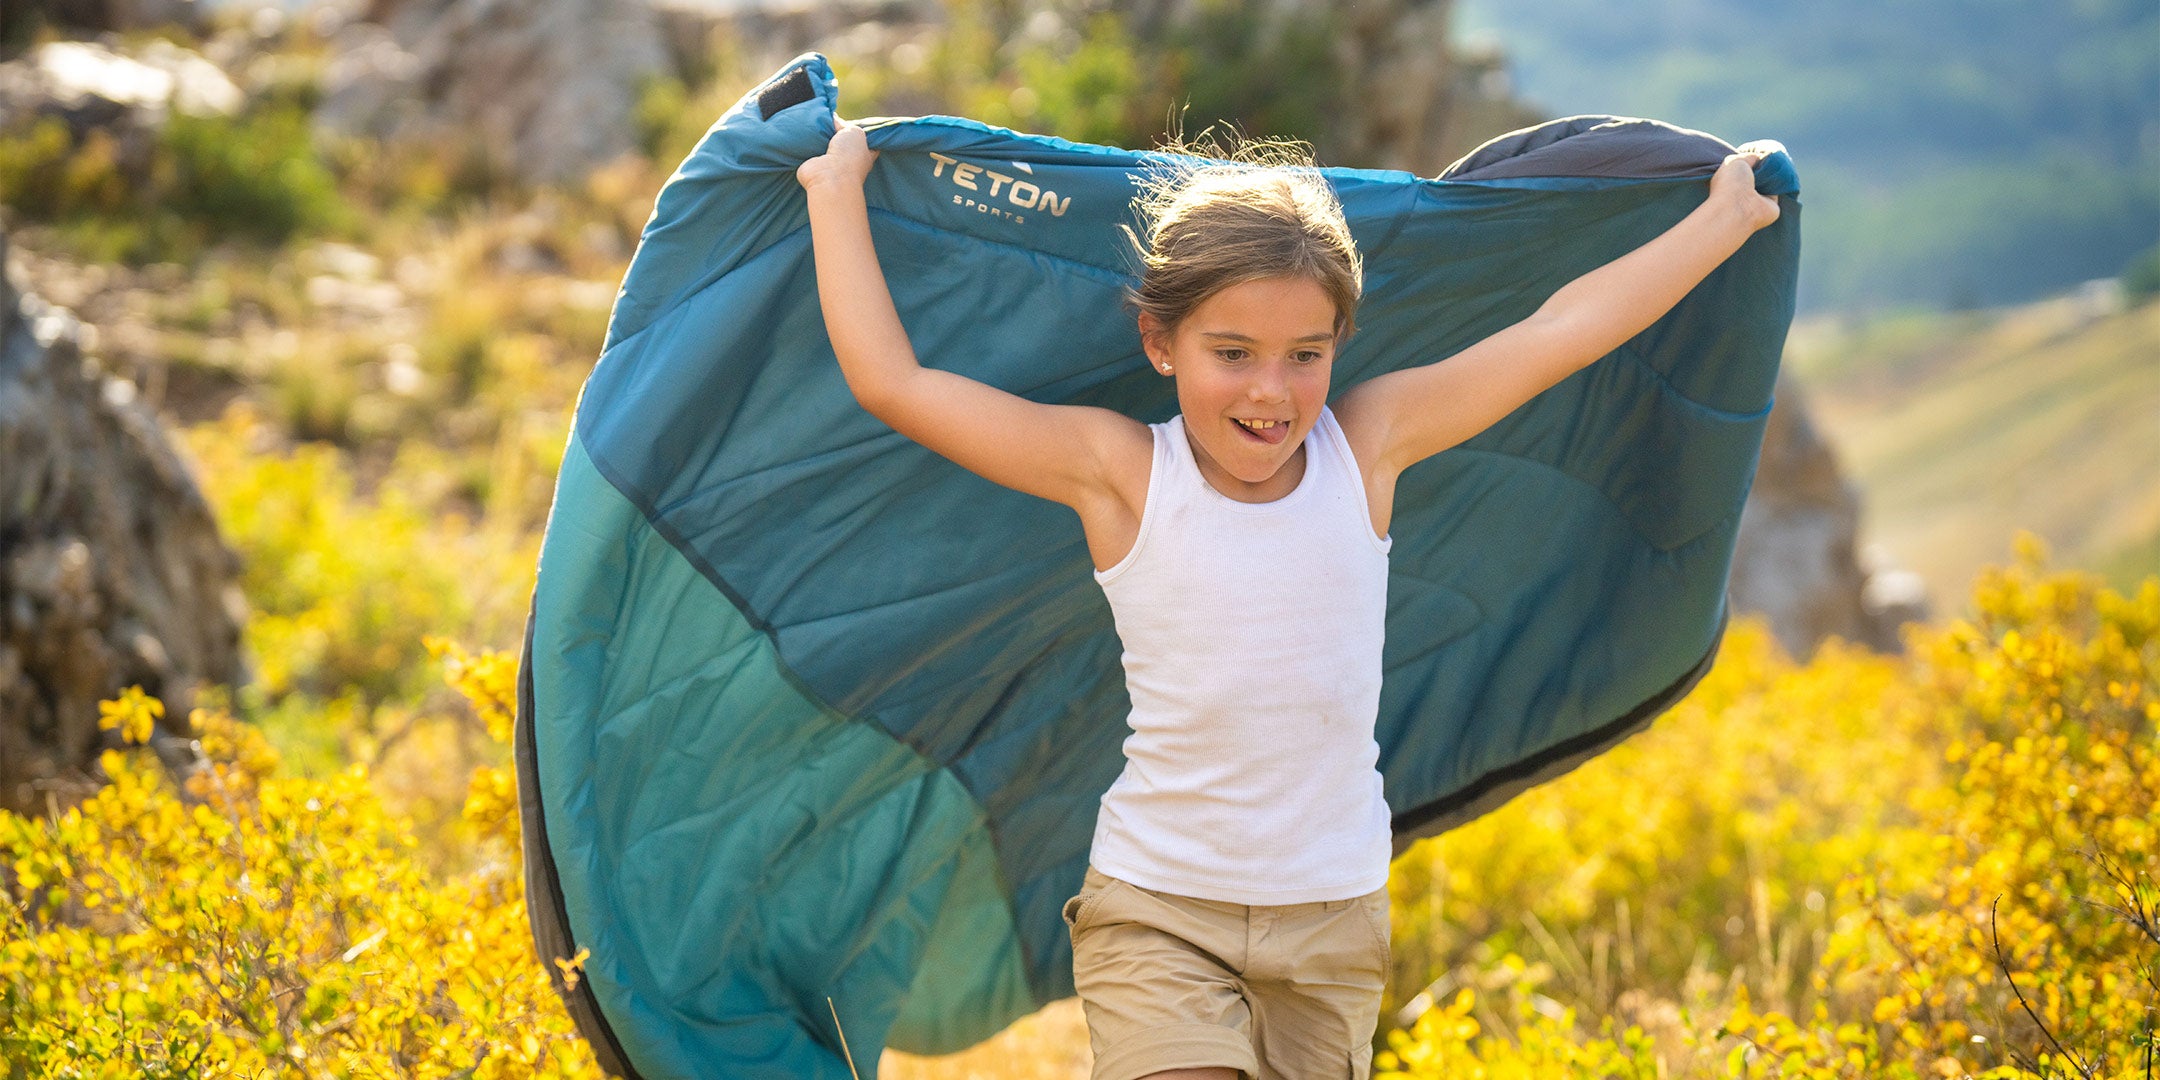 A young girl runs through a field of wildflowers while holding her sleeping bag as a cape.